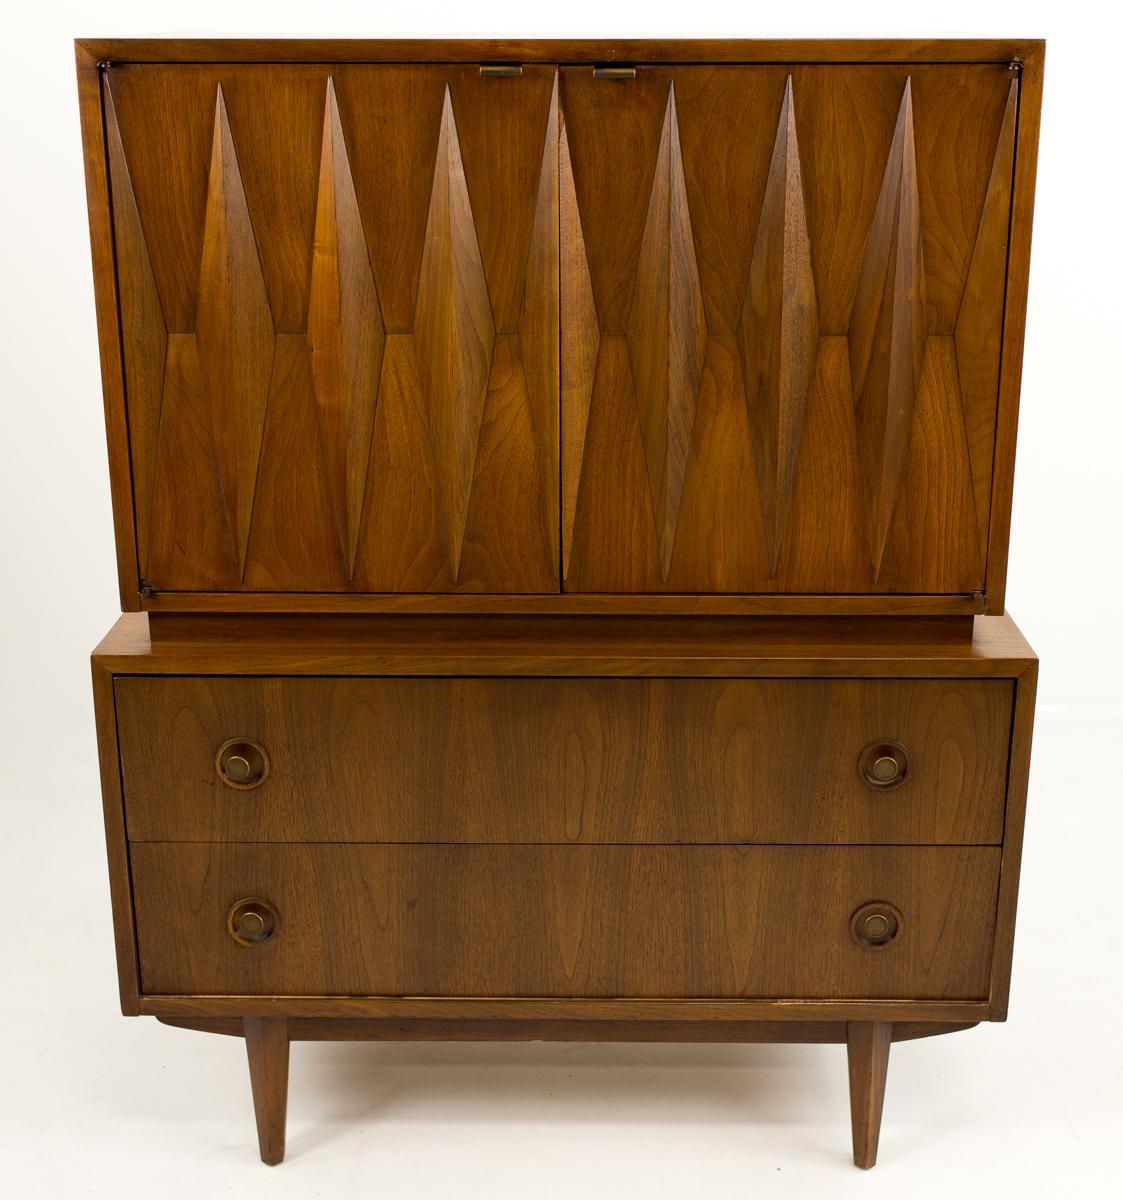 Albert Parvin for American of Martinsville mid century diamond highboy dresser

This dresser measures: 38.5 wide x 18.5 deep x 48 inches high

All pieces of furniture can be had in what we call restored vintage condition. That means the piece is